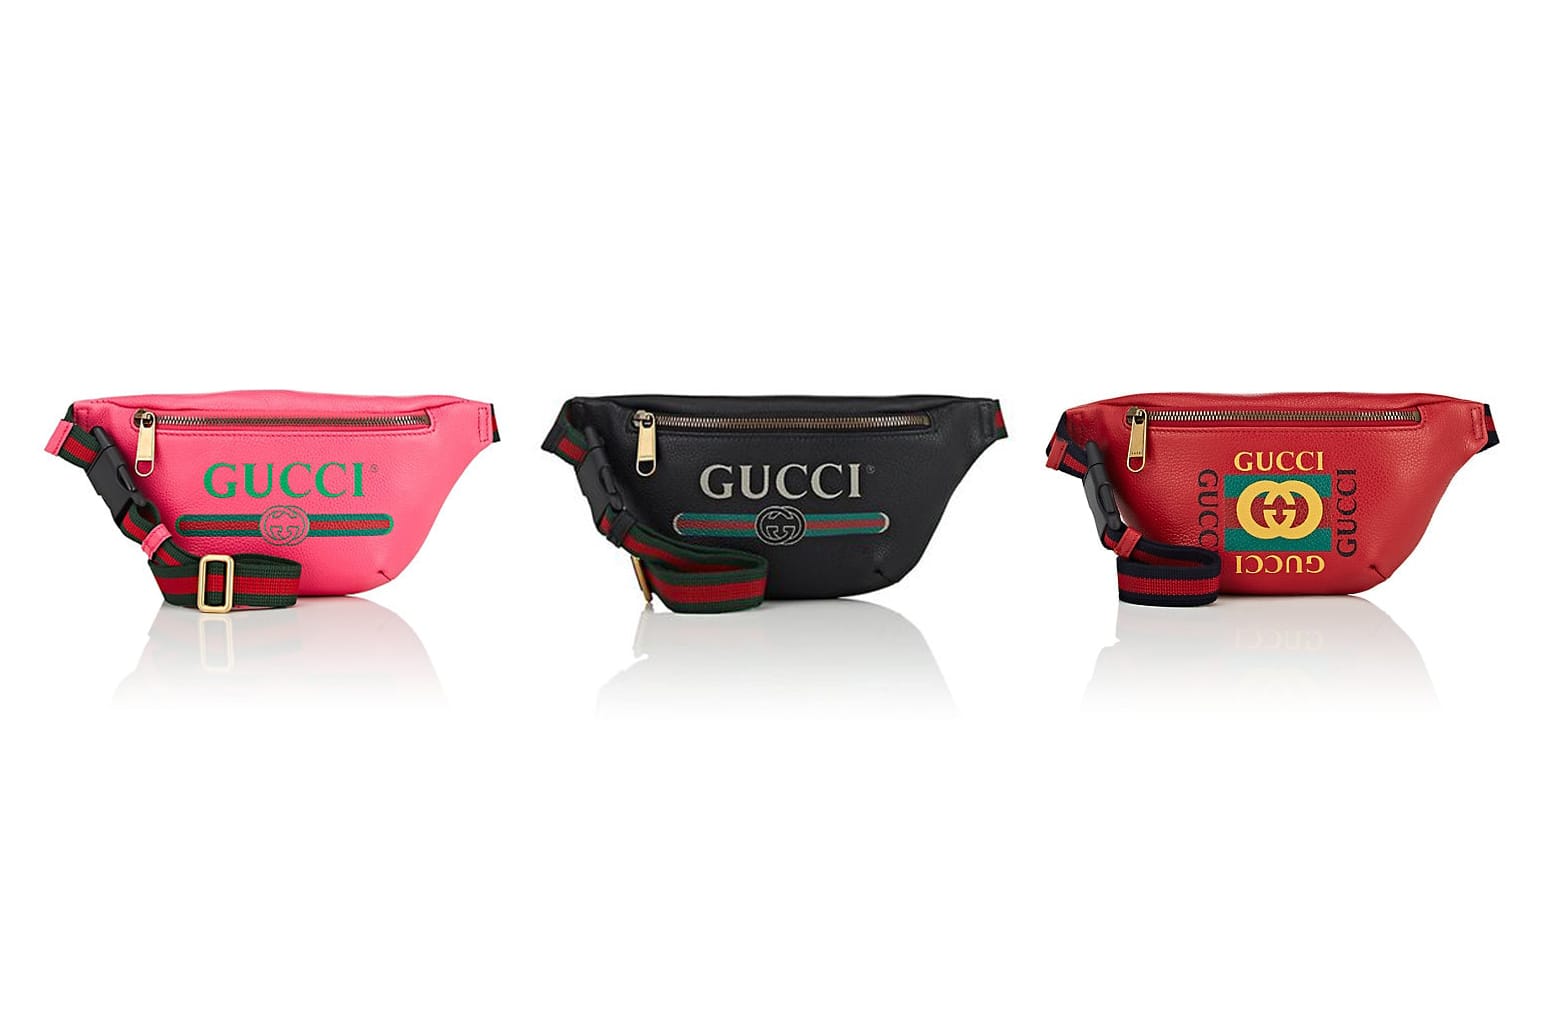 gucci is now yesterday fanny pack